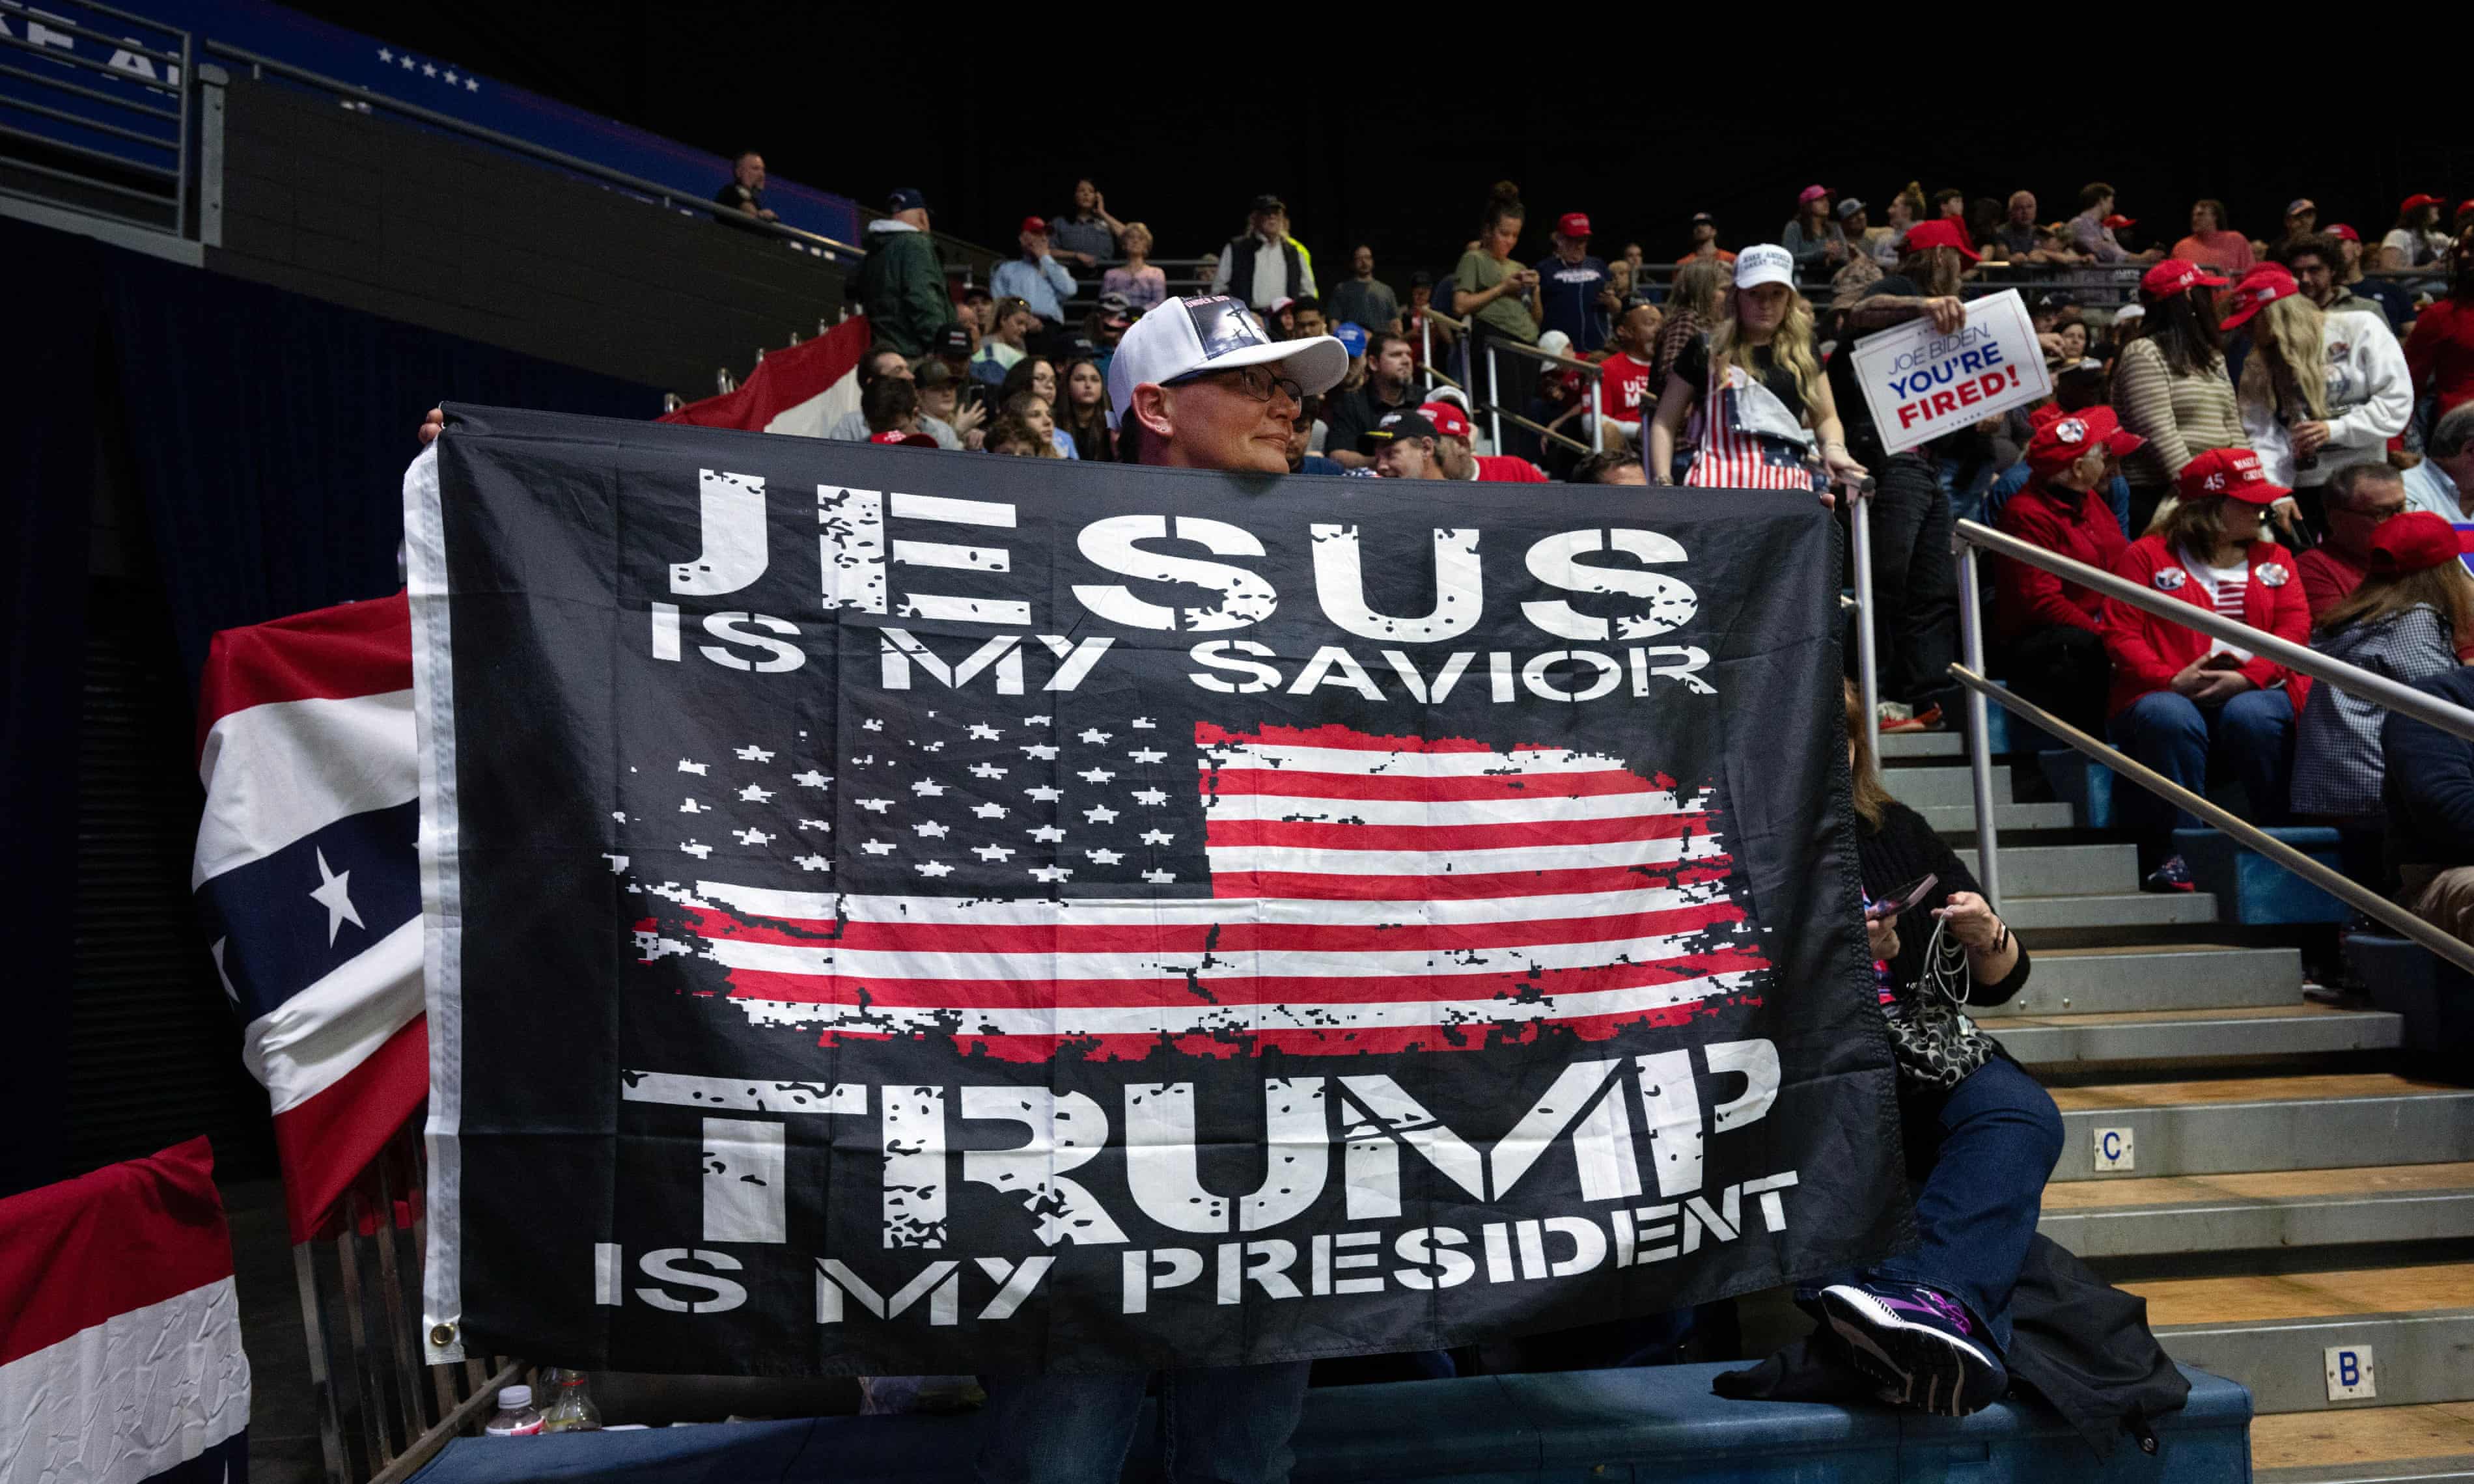 Christian nationalists embrace Trump as their savior – will they be his? (theguardian.com)